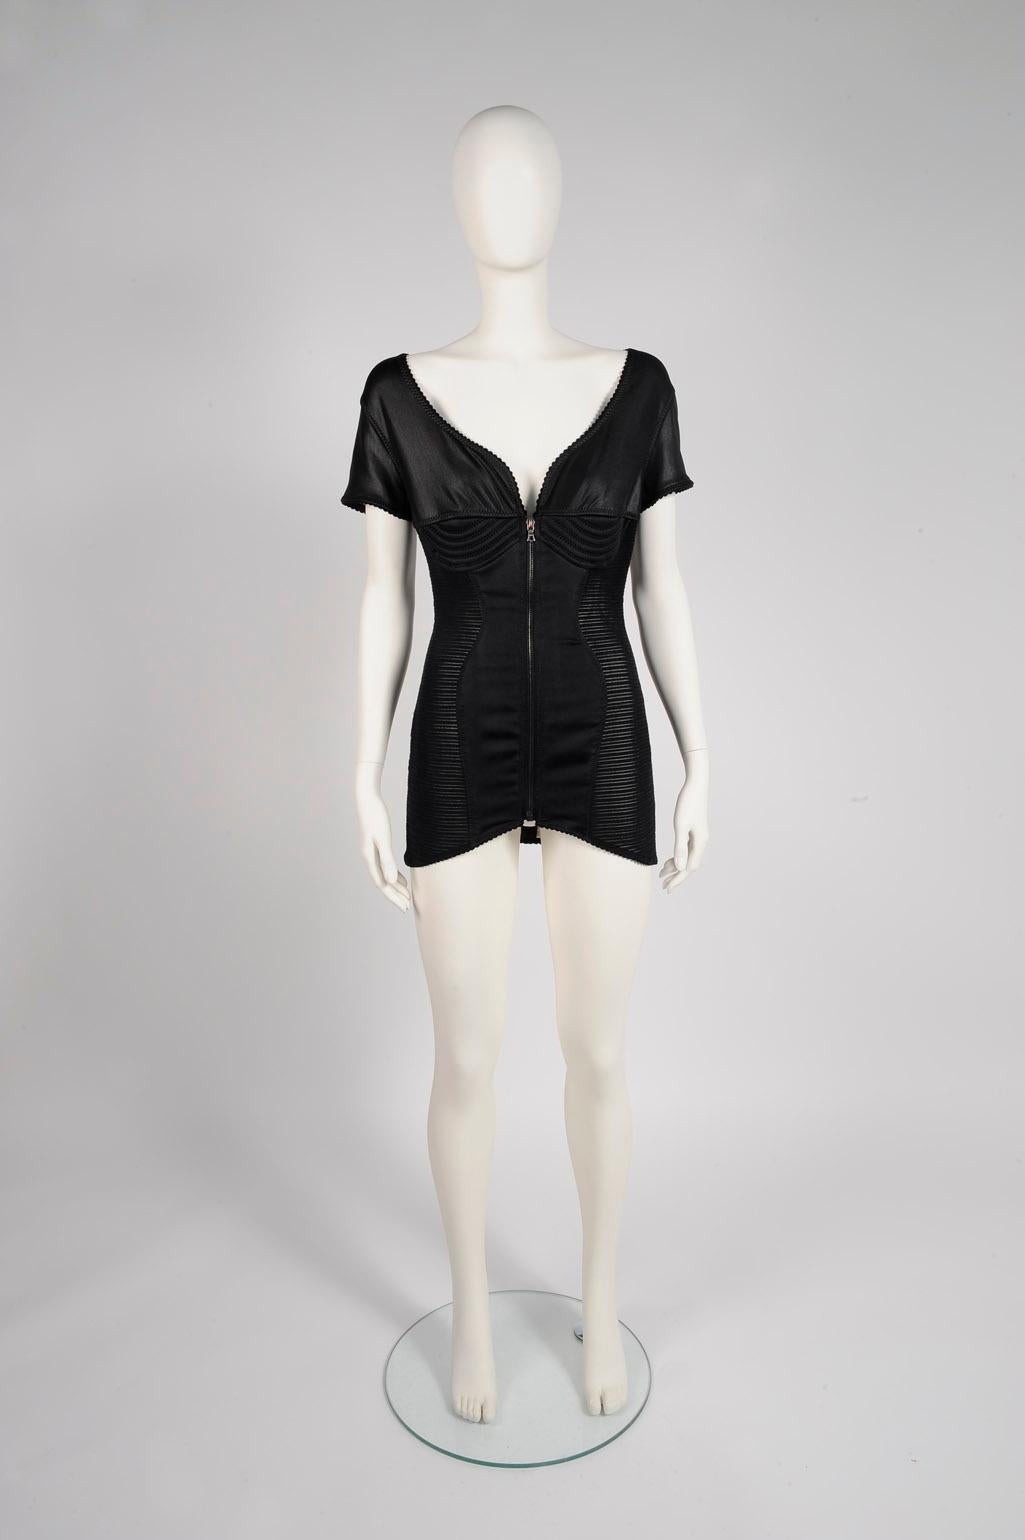 Pioneer in bandage silhouette, Jean Paul Gaultier empowered feelings of confidence, femininity and sexiness with his iconic models designs. Conceived as like a shapewear, this rare SS1987 mini tunic corset dress will make your figure utterly